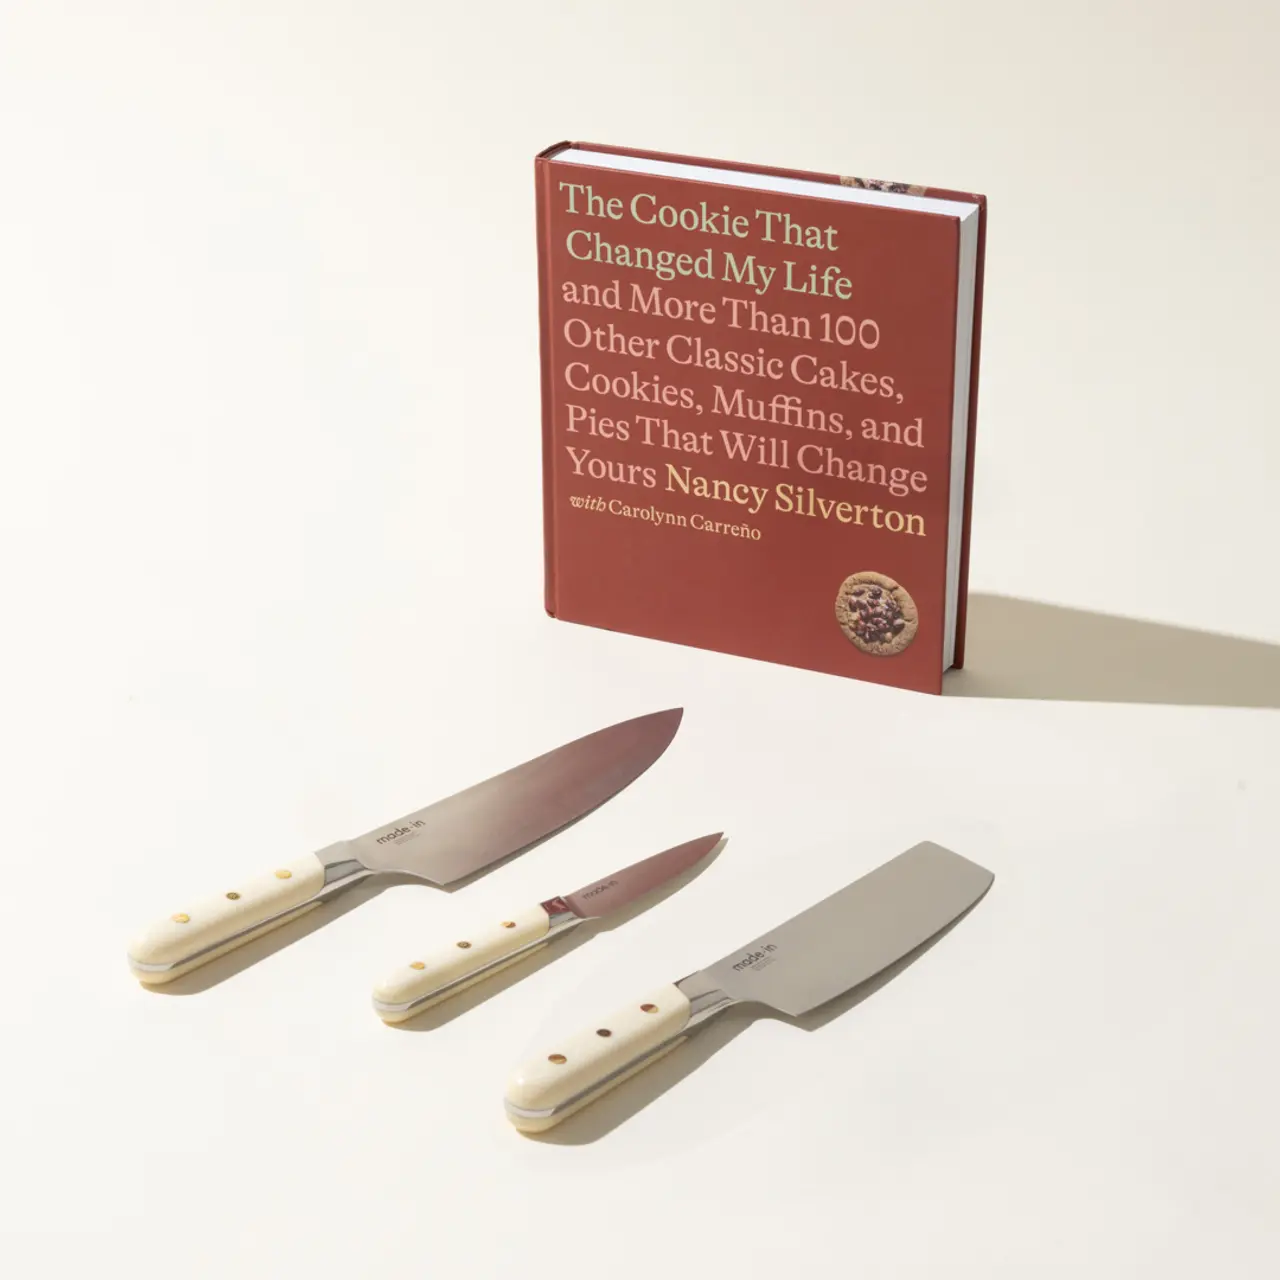 A cookbook titled "The Cookie That Changed My Life" is displayed upright behind three kitchen knives with cream-colored handles on a light surface.